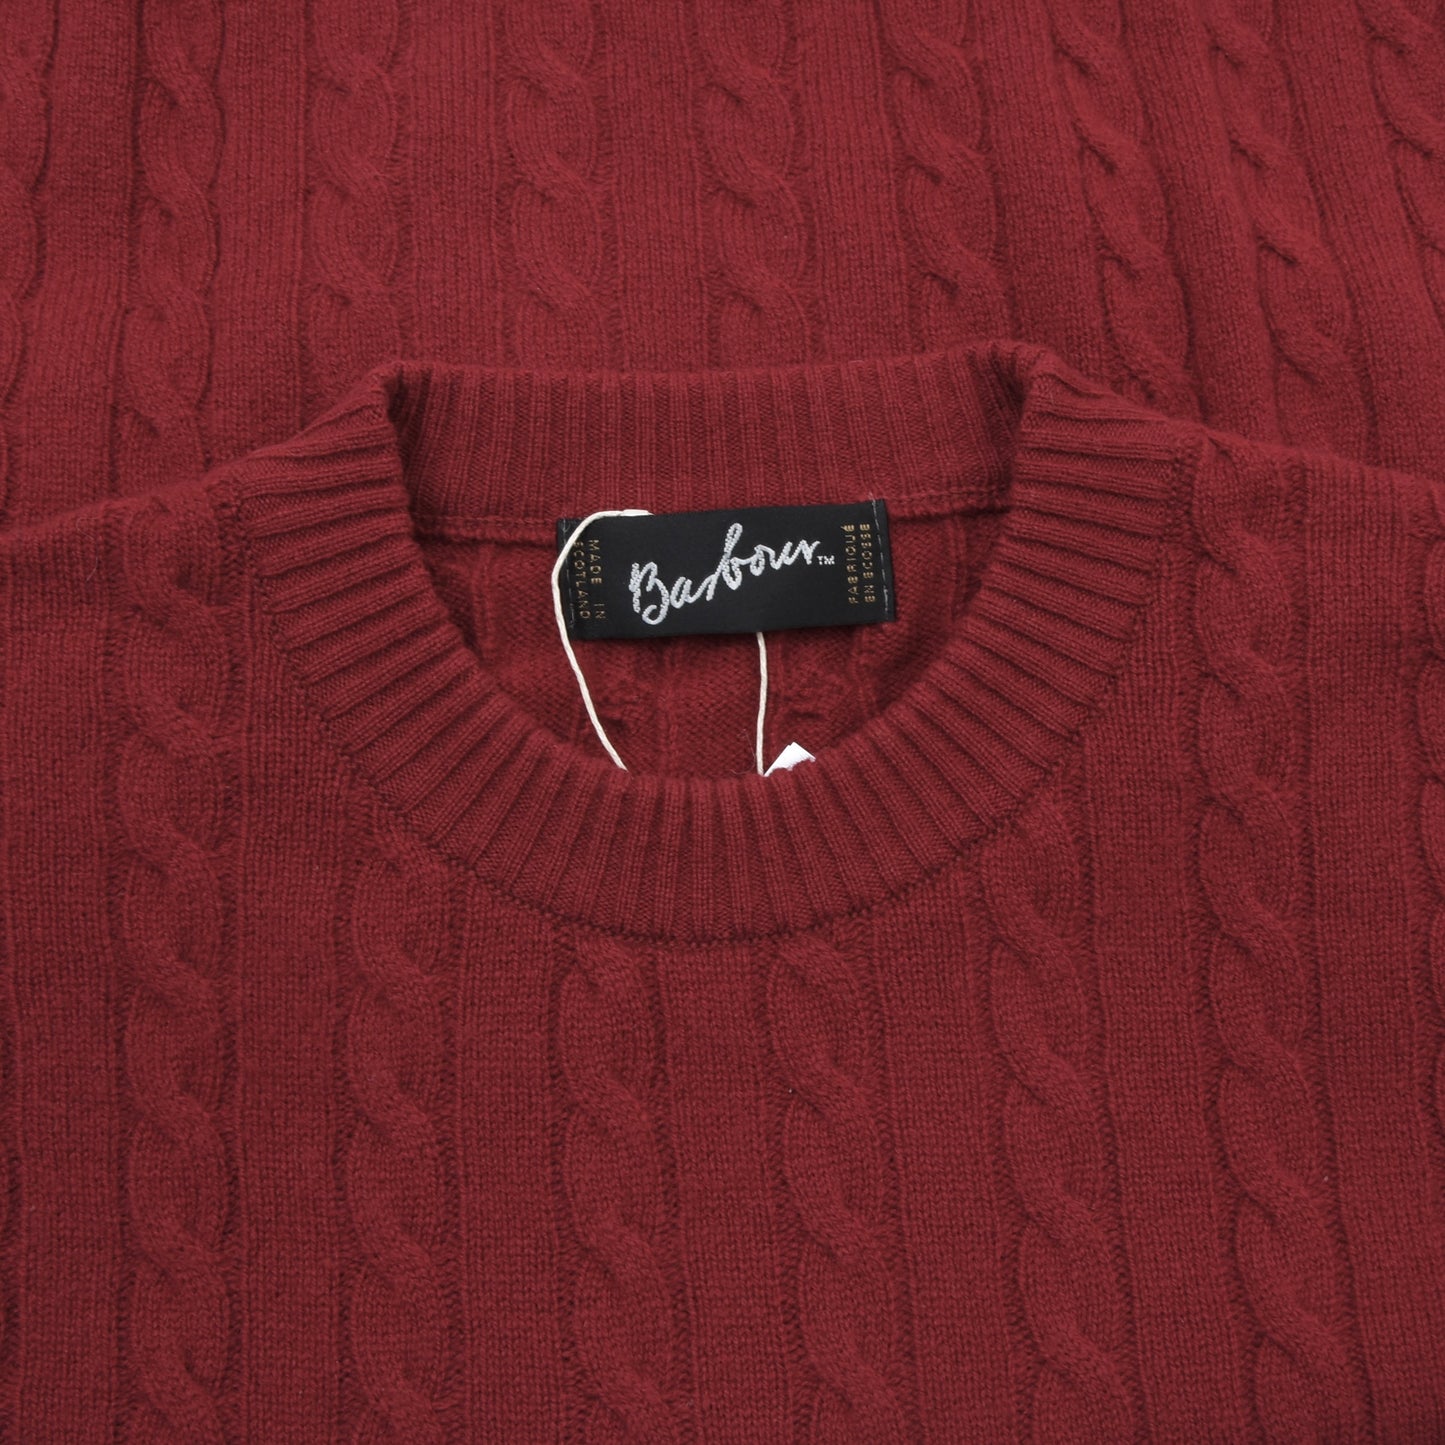 Barbour Cableknit Sweater D414 Size C42/107cm - Red